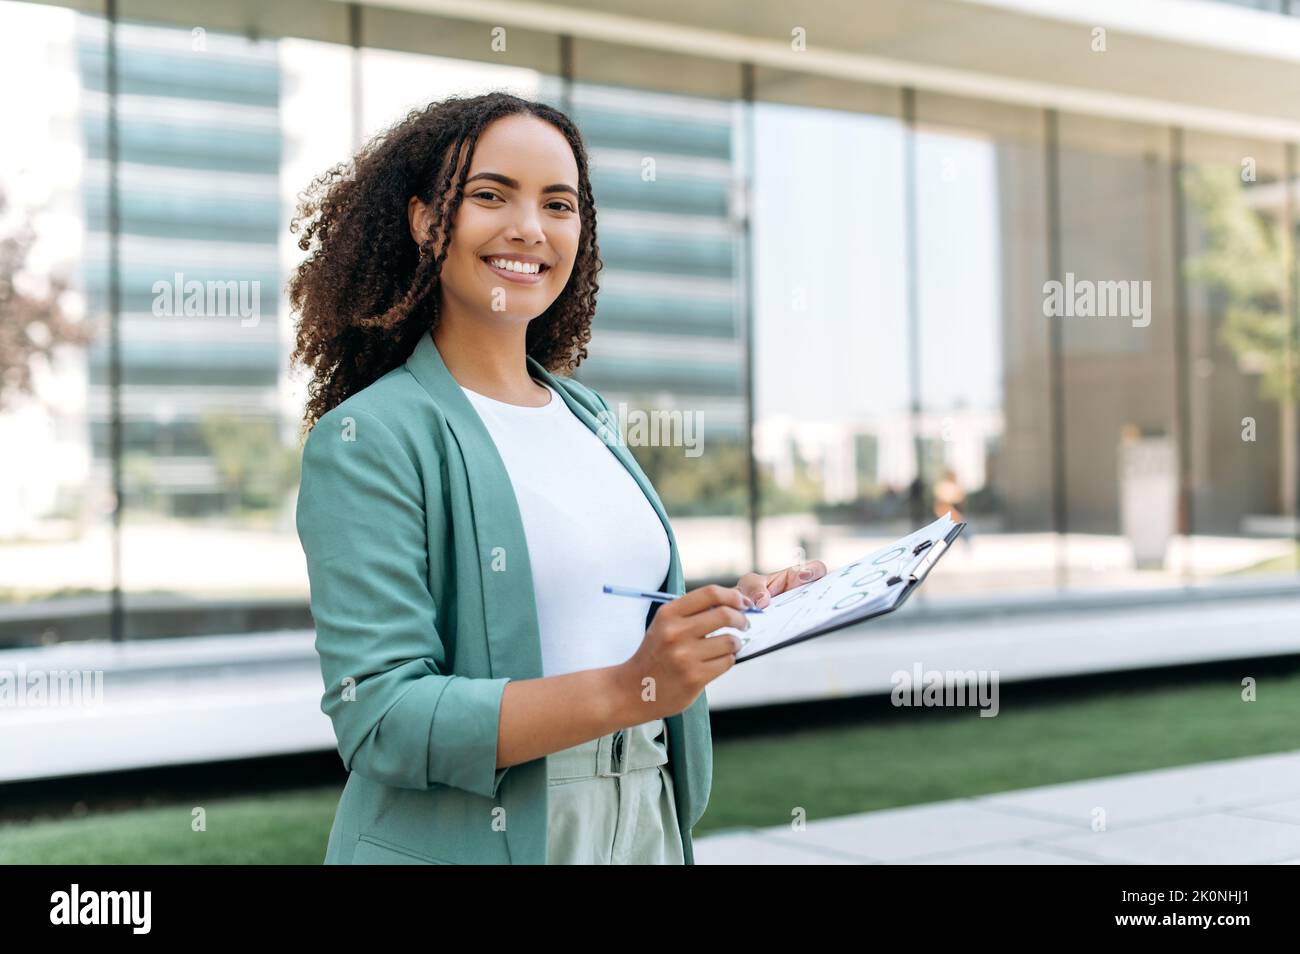 Portrait of lovely positive confident successful mixed race young woman with curly hair, business lady, trading broker, in elegant wear, standing outdoors with financial charts, looks at camera, smile Stock Photo